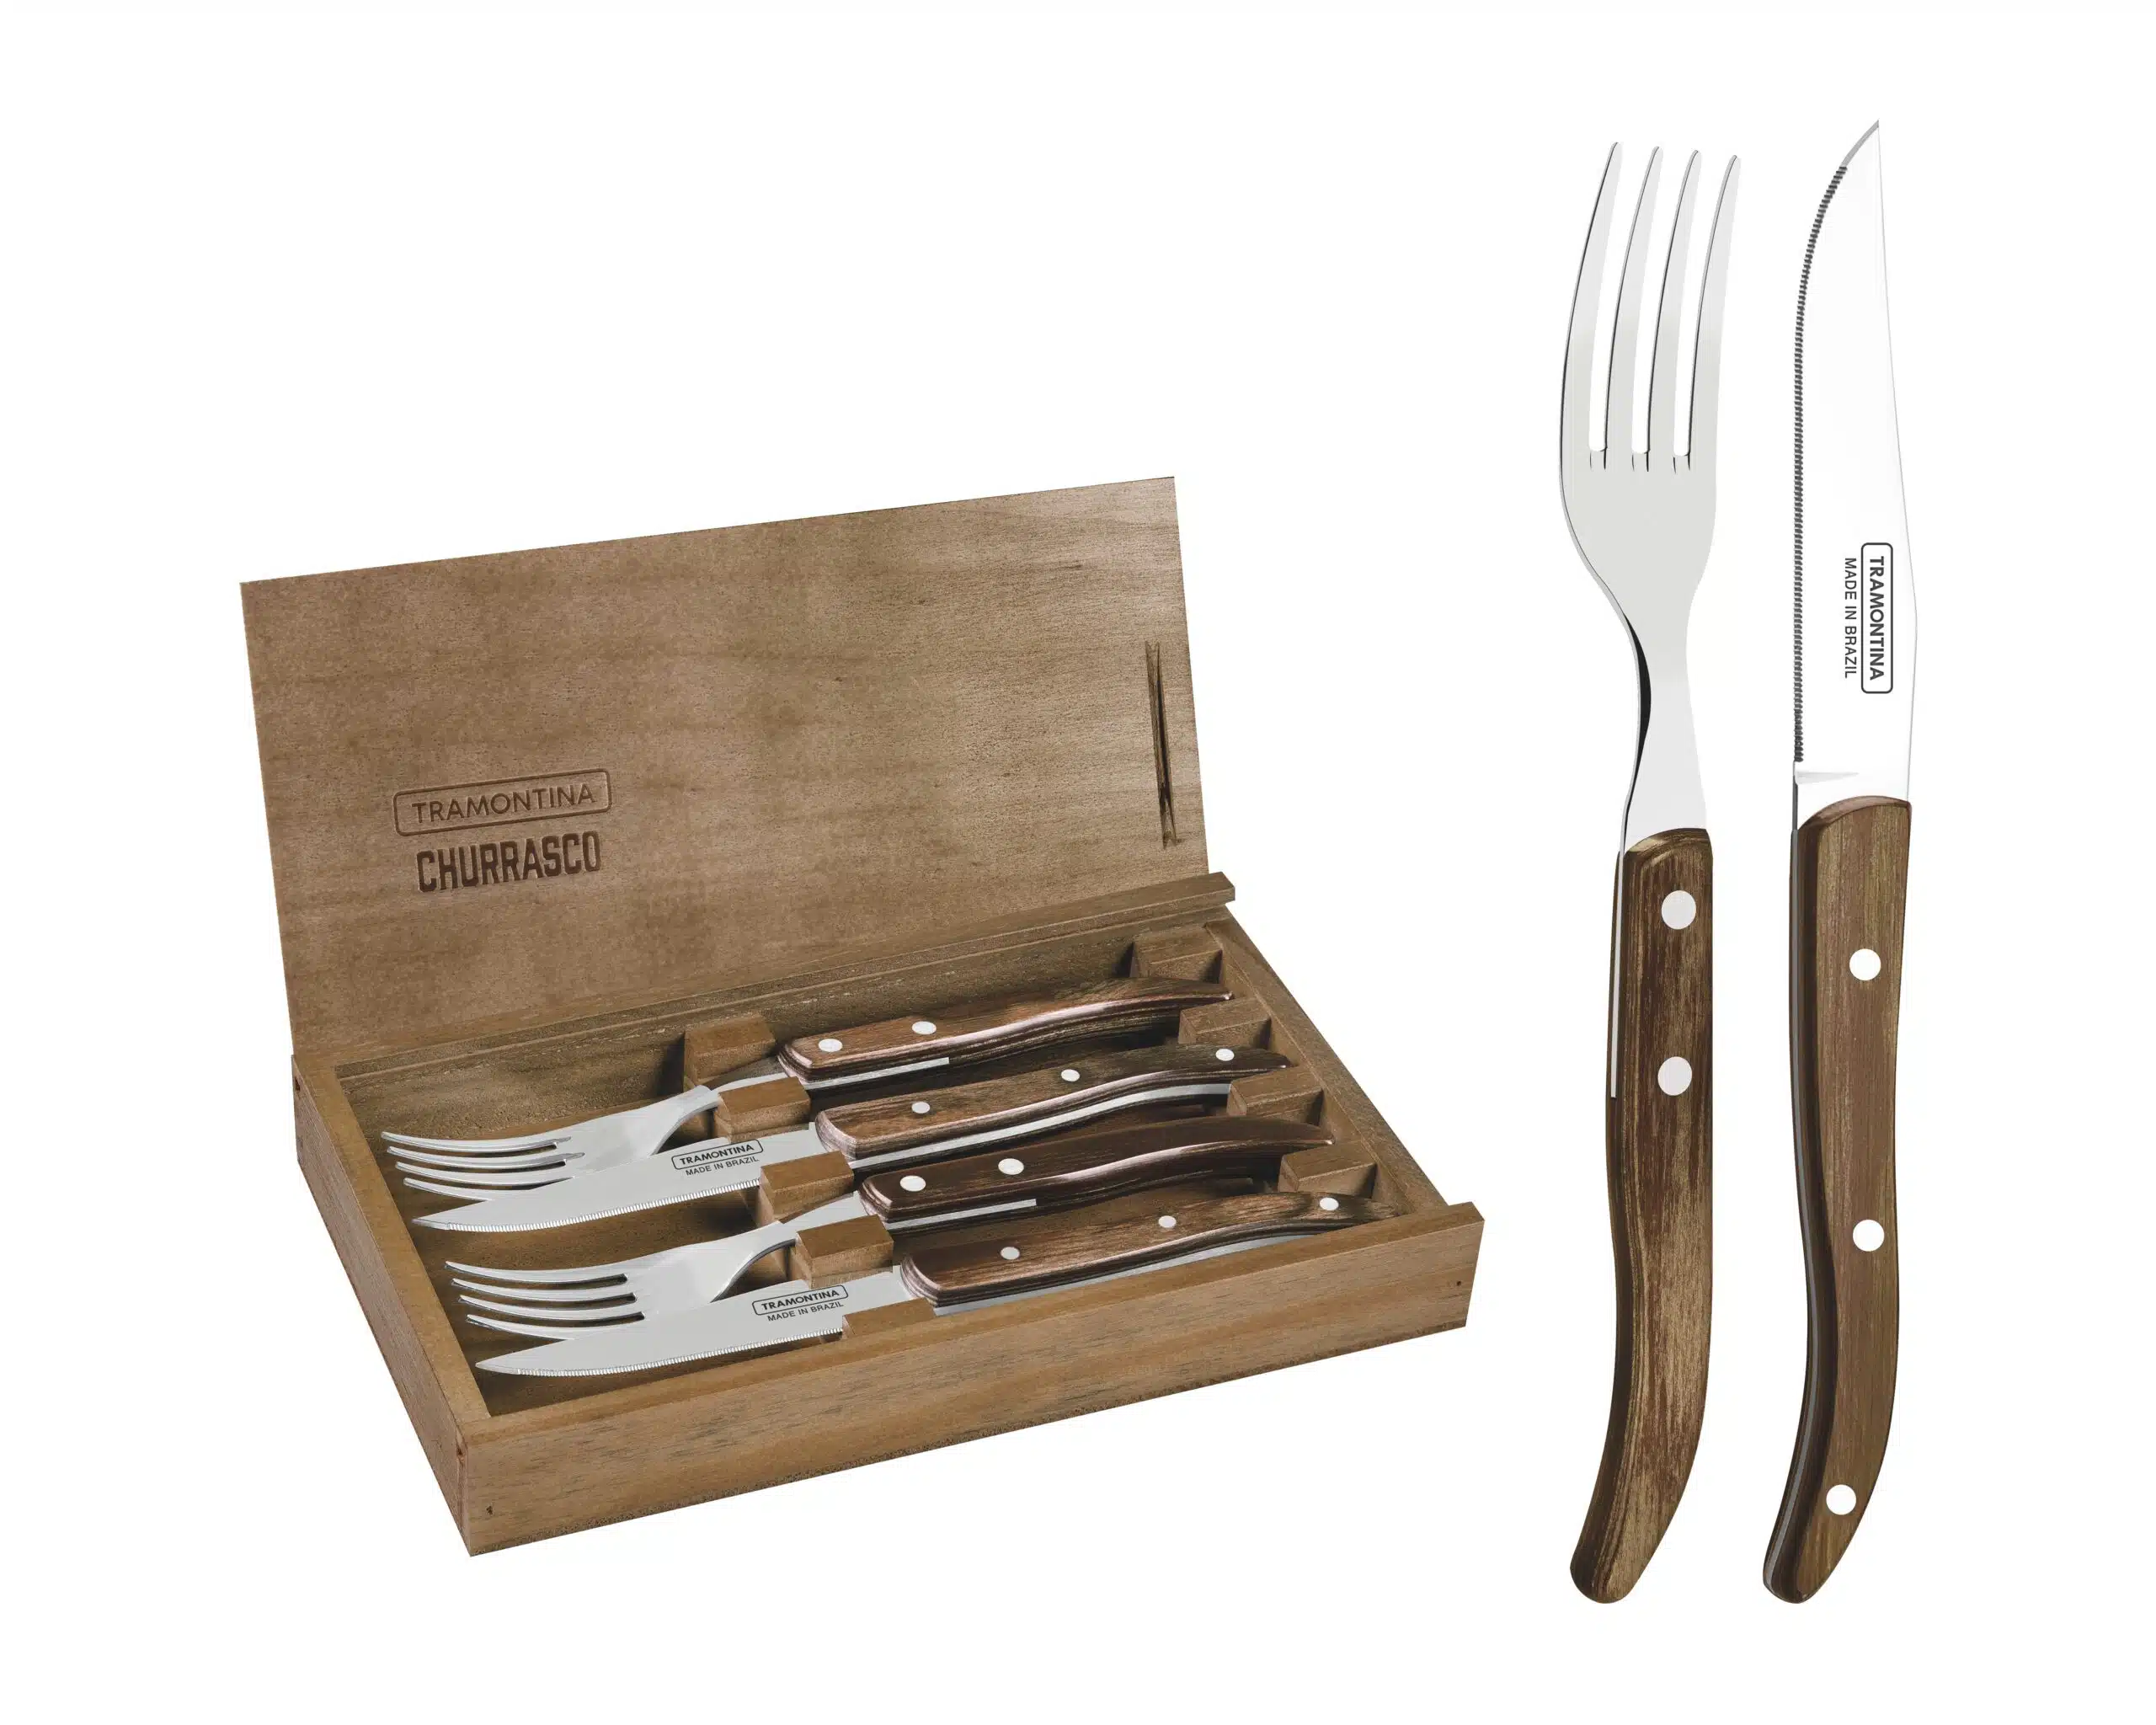 https://www.maisonflair.co.uk/wp-content/uploads/2022/09/Tramontina-4-piece-French-Style-Knife-and-Fork-Set-in-open-box-scaled.jpg.webp